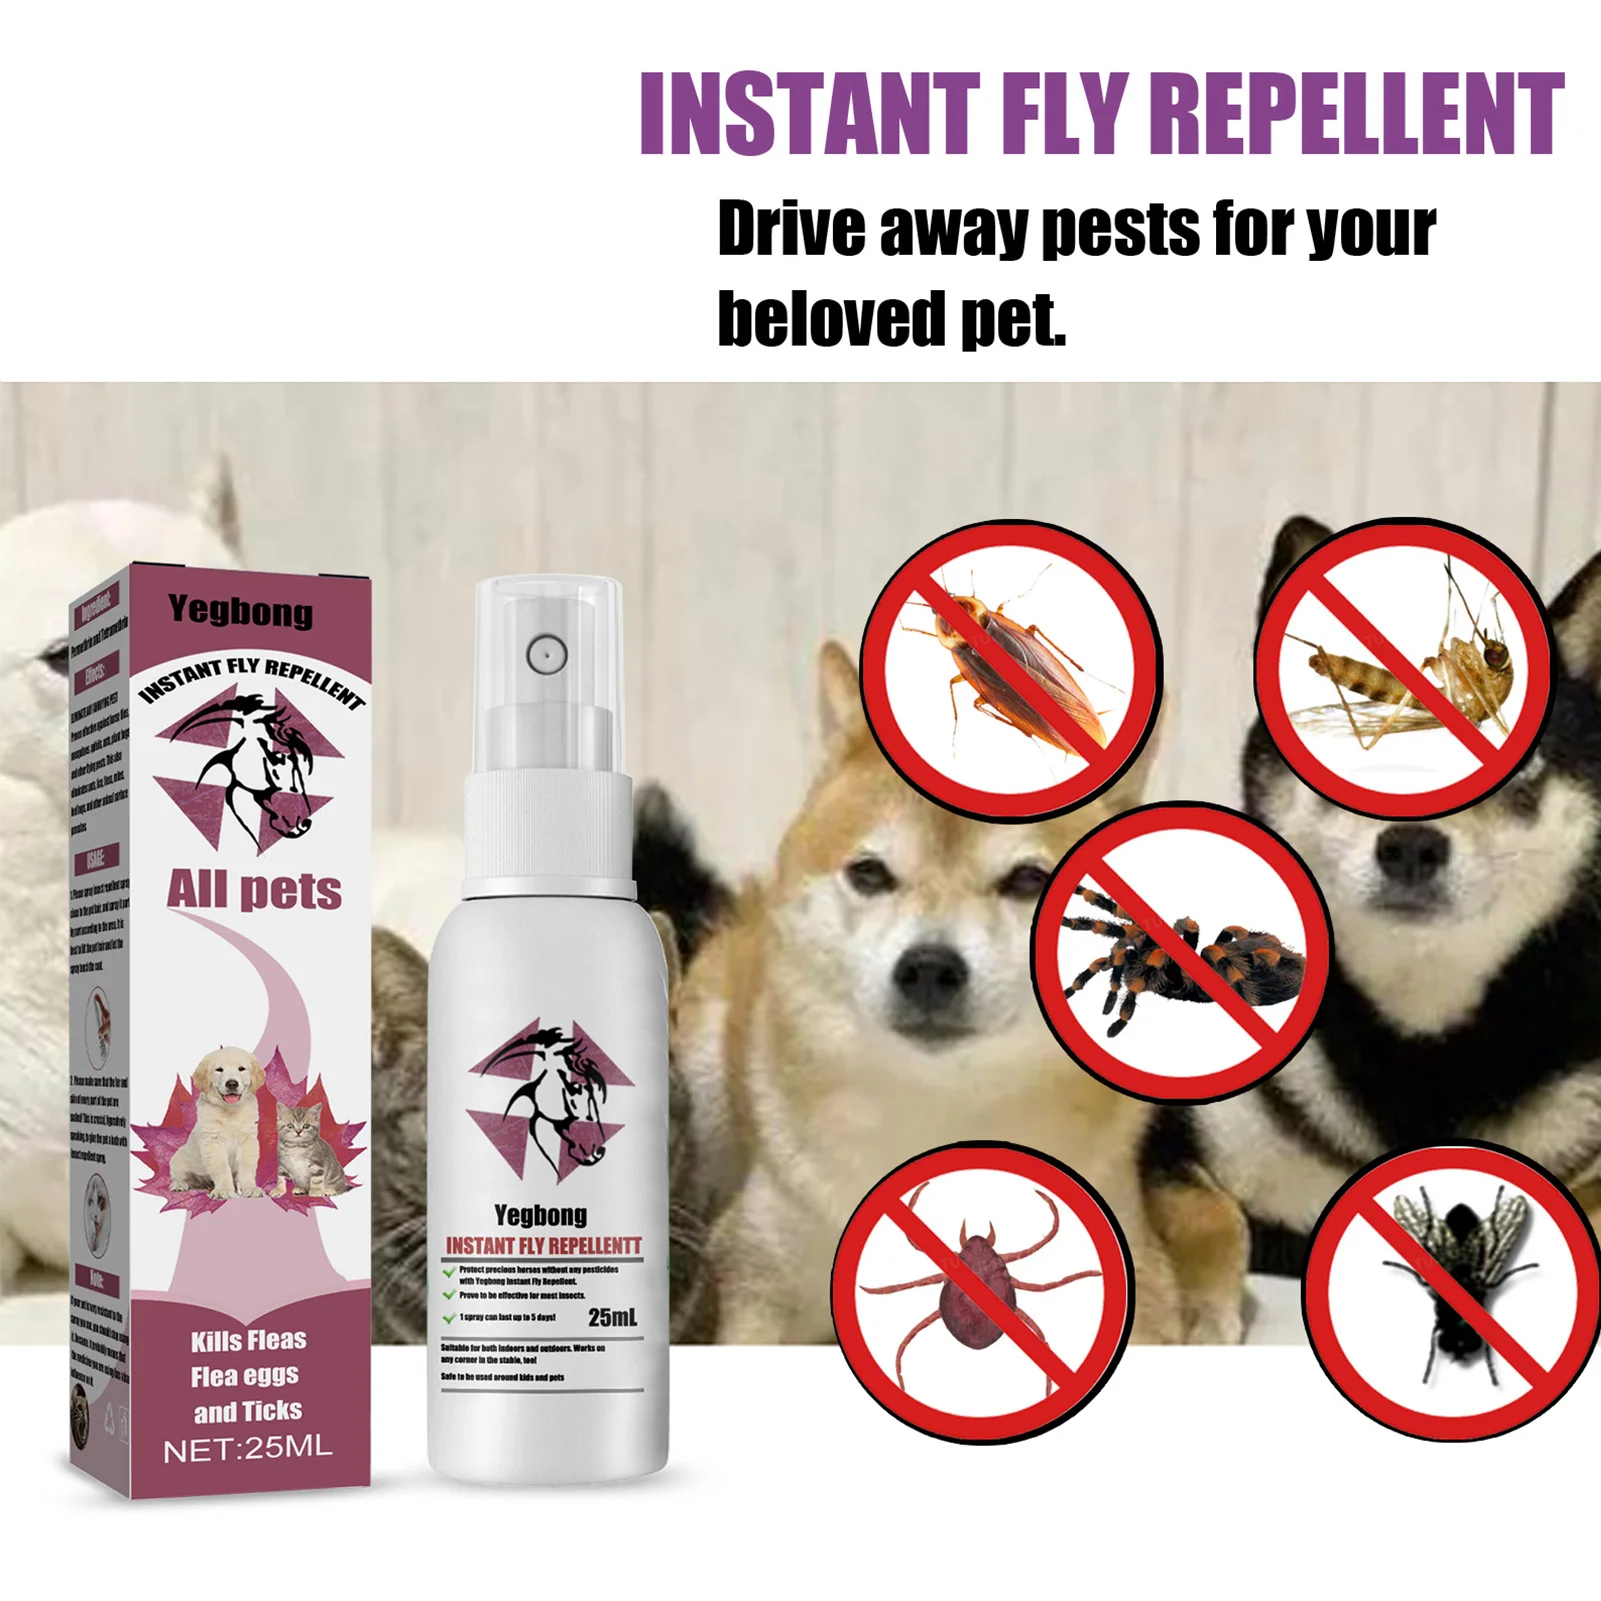 

New Pet Skin Spray Fleas Tick And Mosquitoes Spray For Dogs Cats And Home Fleas Eliminator Control Prevention Treatments Protect